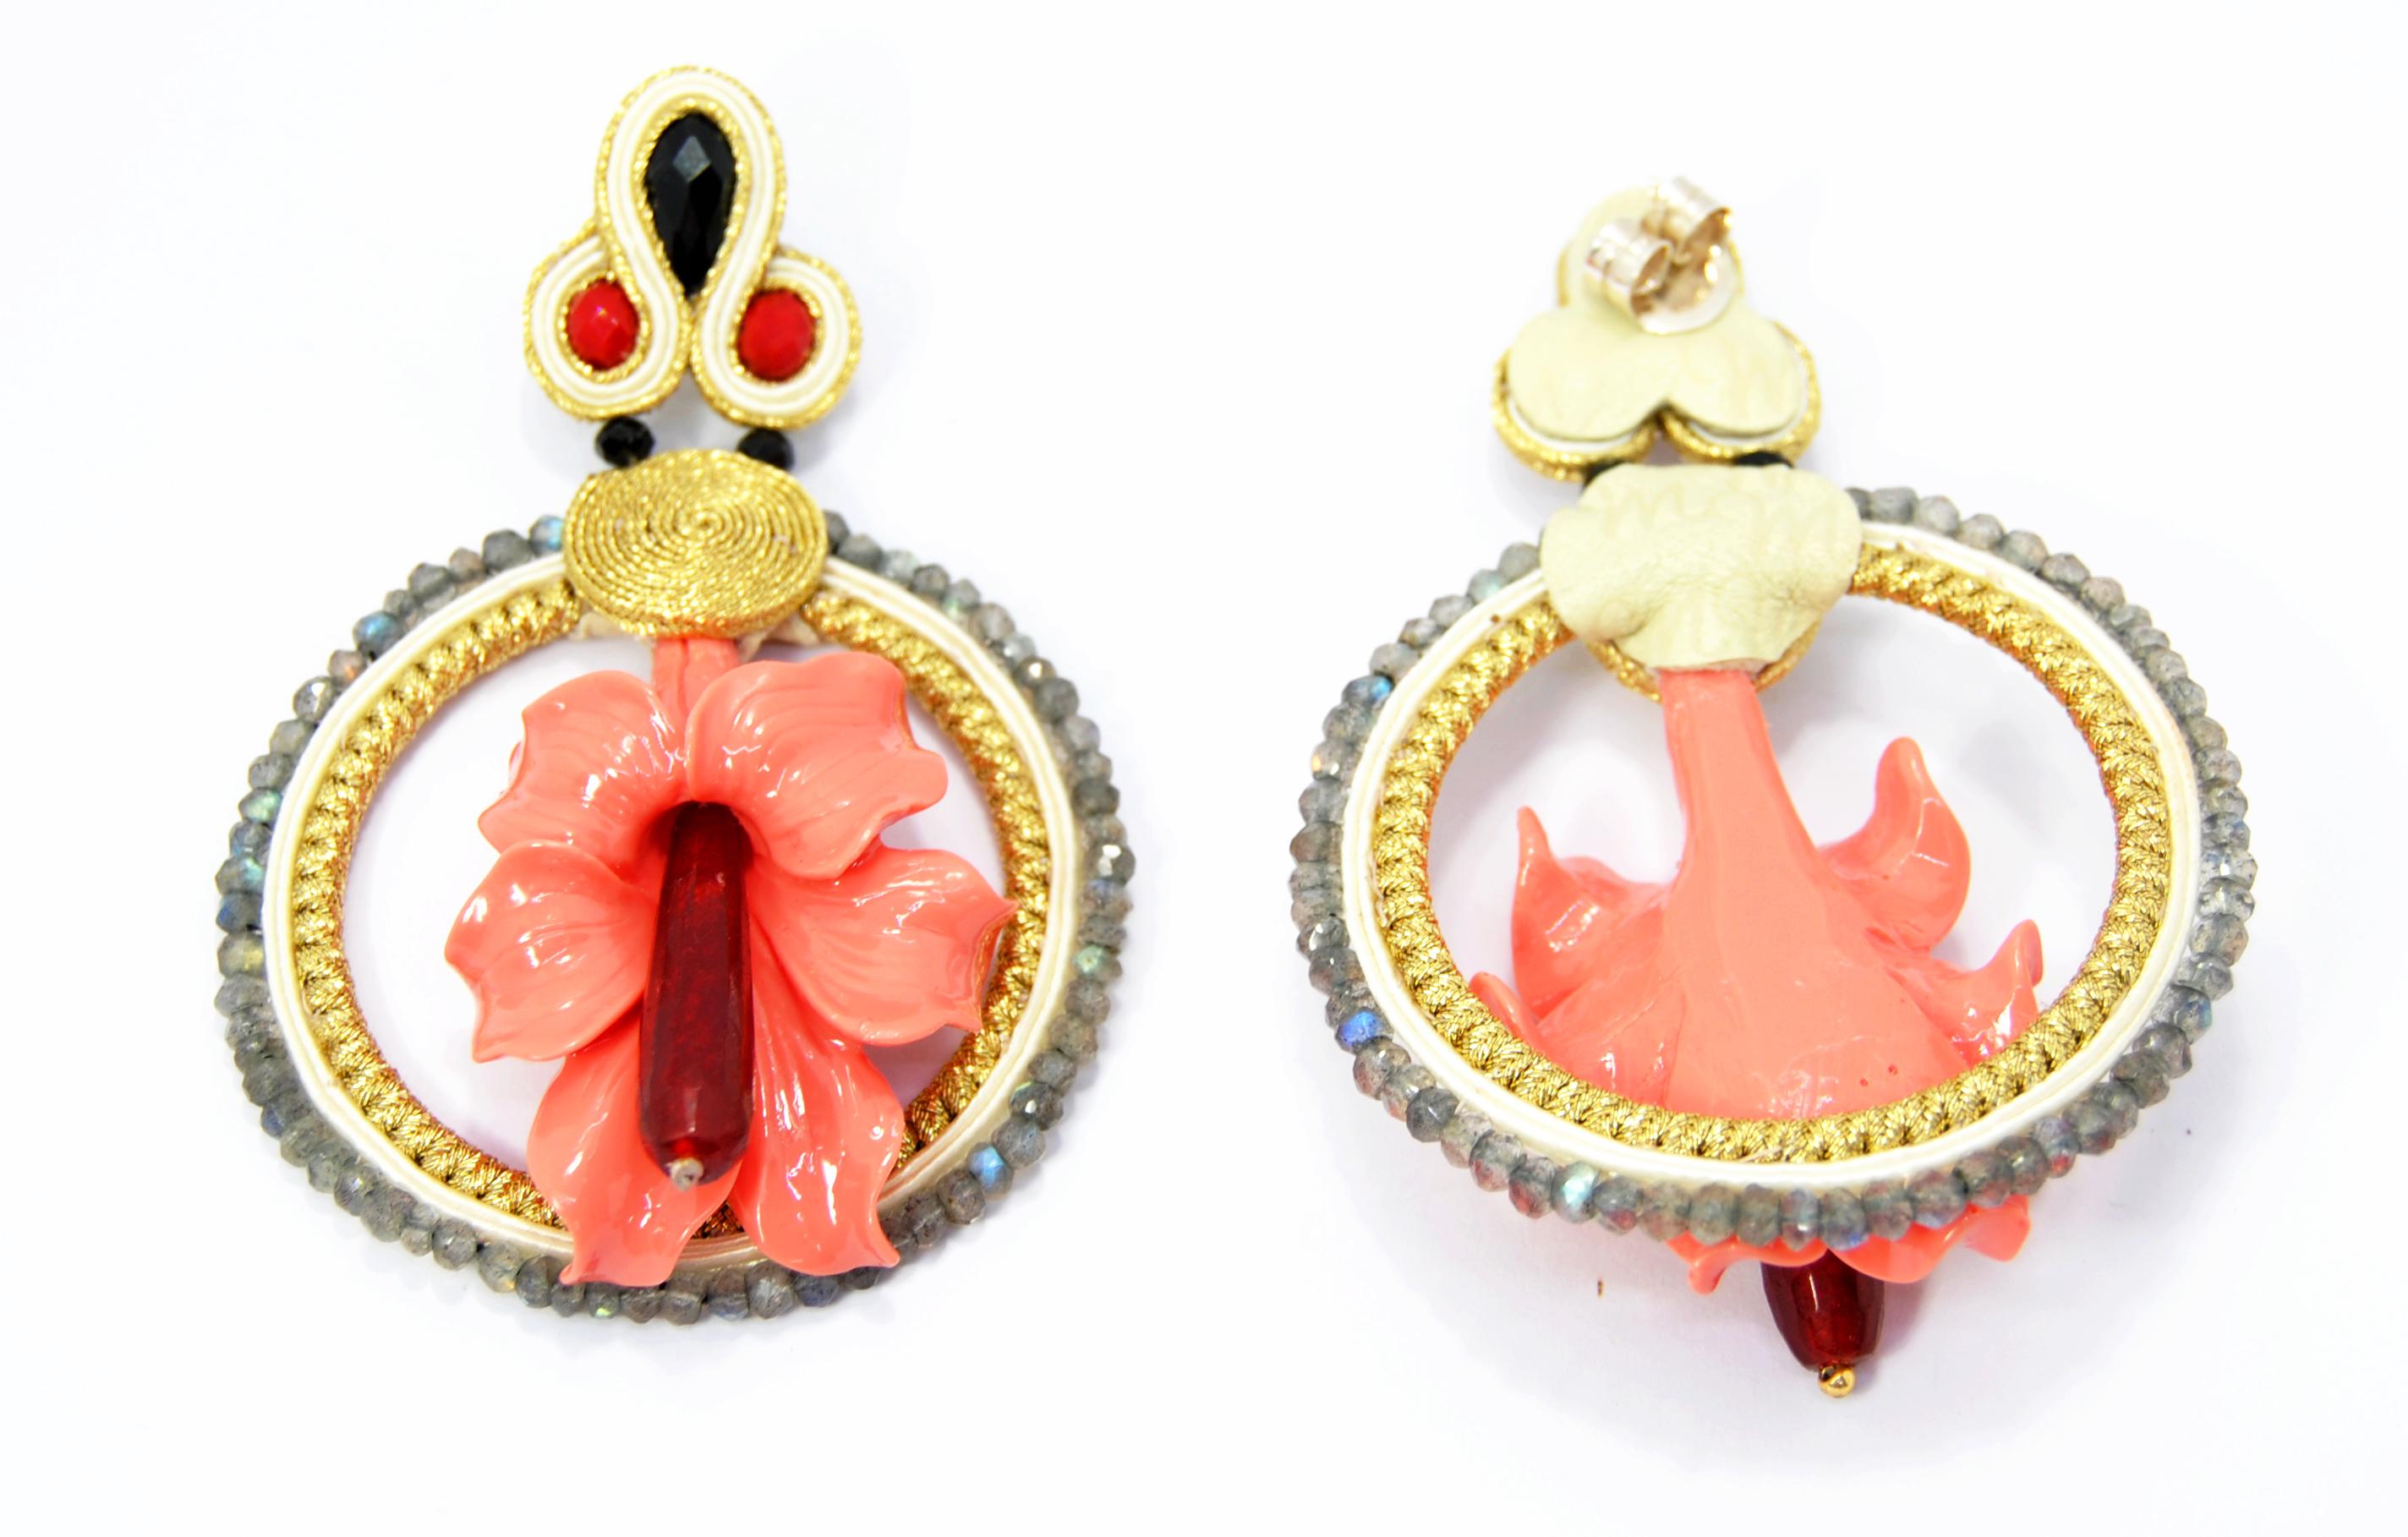 Soutache Technique earrings with pink resin and red jade pistil  in sterling silver closure. A Joint venture of Irama Pradera and Musula Jewels where they create Colorful, Lively and Light Travel Jewelry that has an Iconic feel and give a modern,